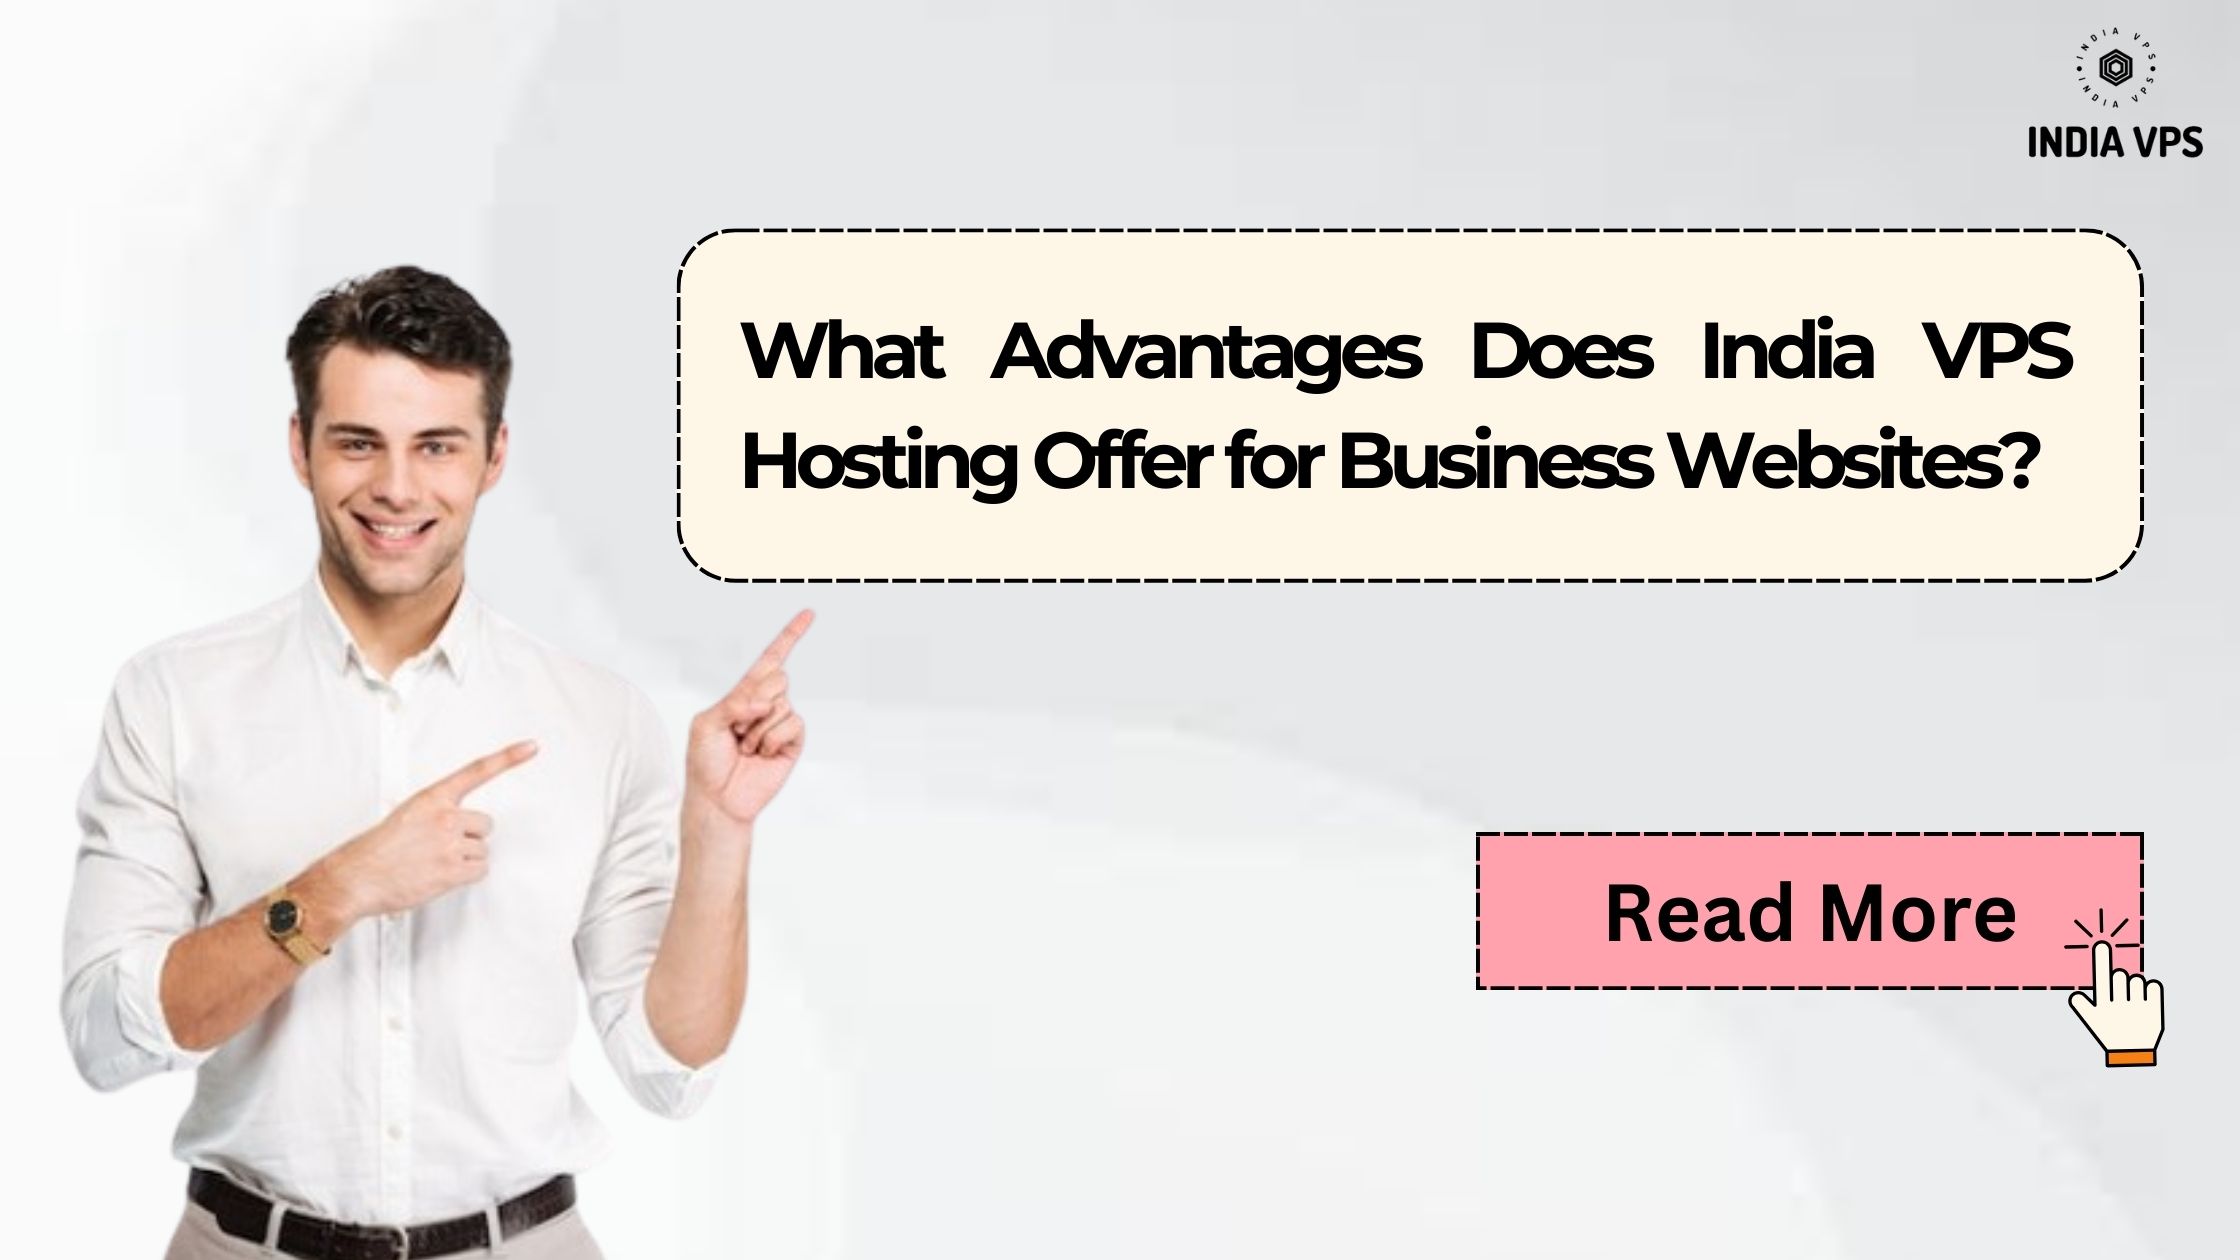 What Advantages Does India VPS Hosting Offer for Business Websites